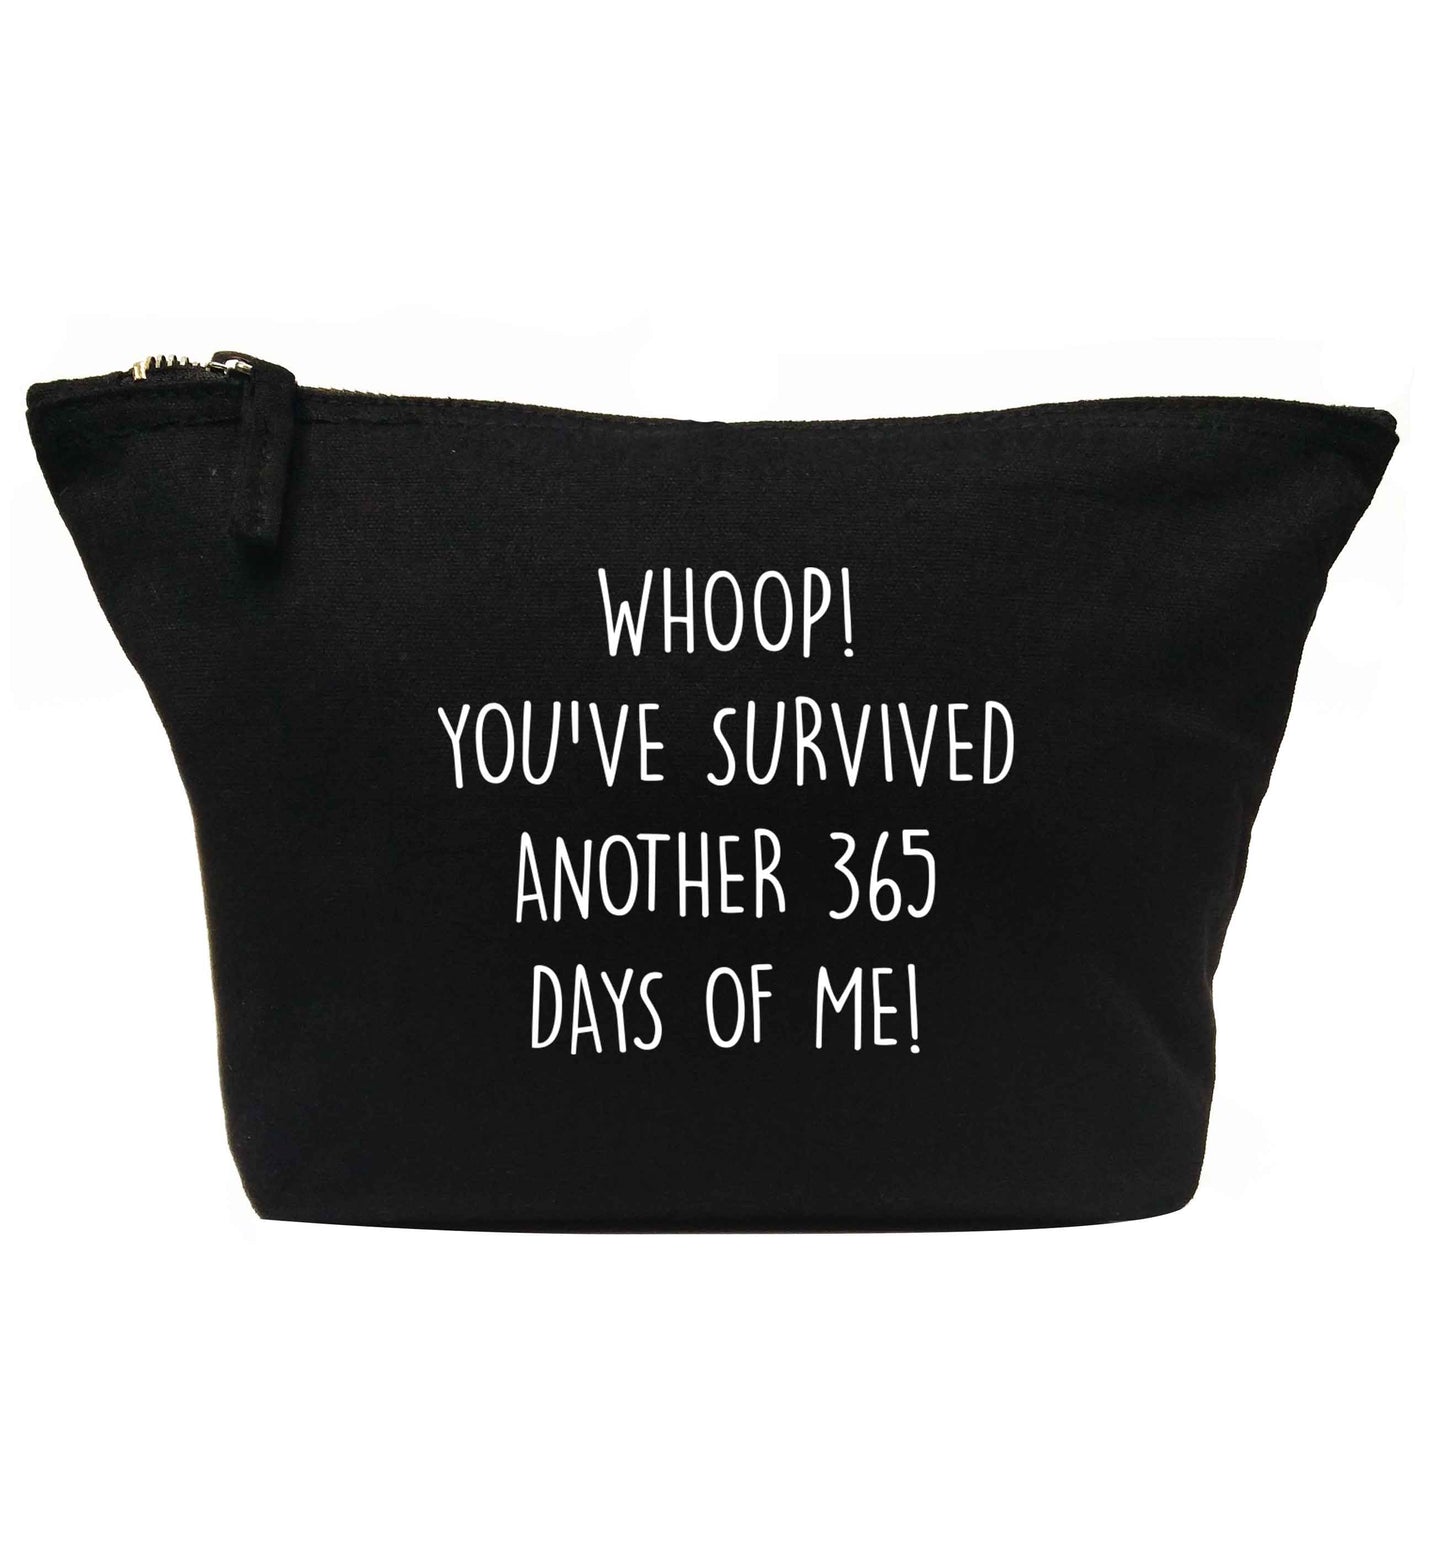 Whoop! You've survived another 365 days with me! | Makeup / wash bag